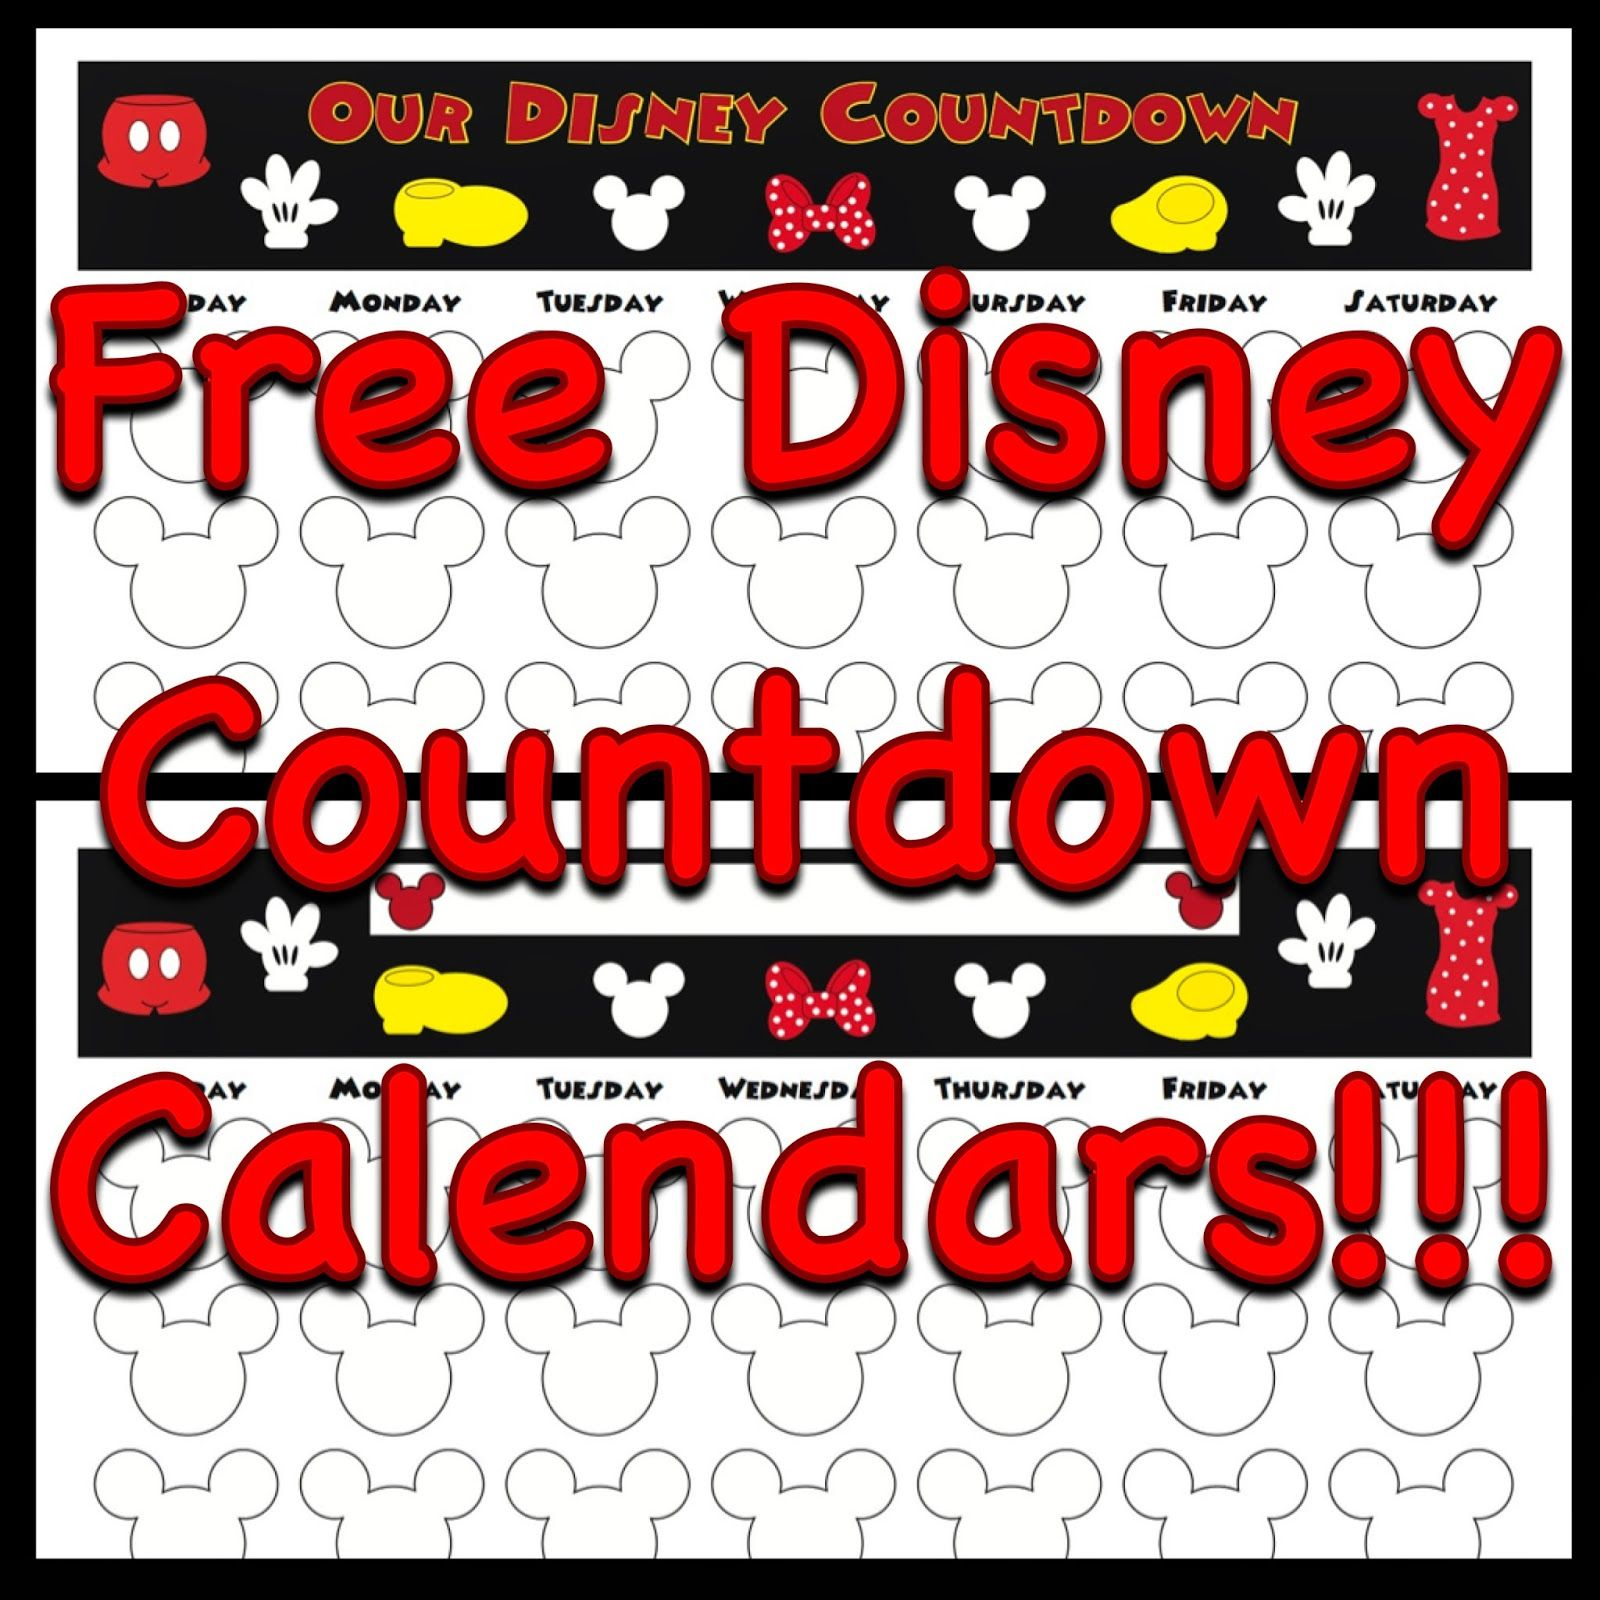 Free Printable Countdown Calendars To Use For Your Next